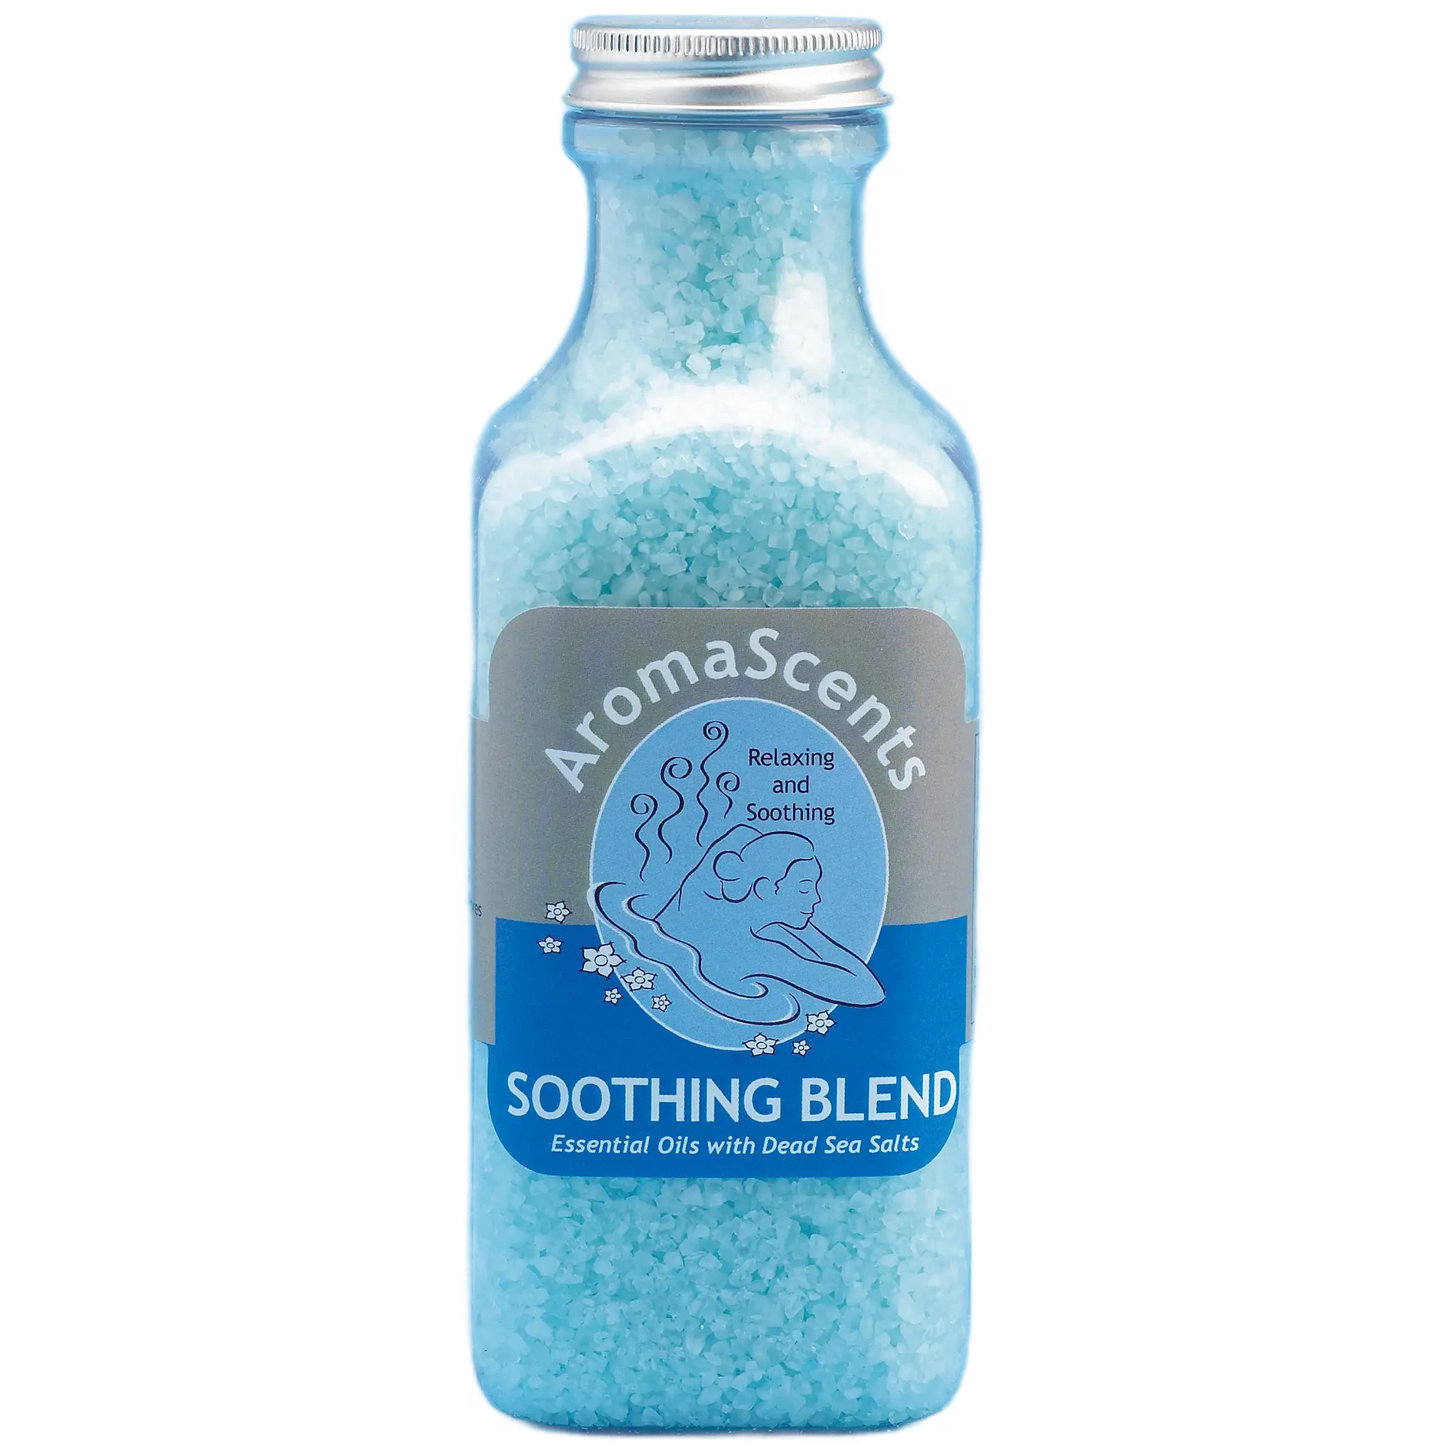 AromaScents Soothing Blend Hot Tub Spa Fragrance